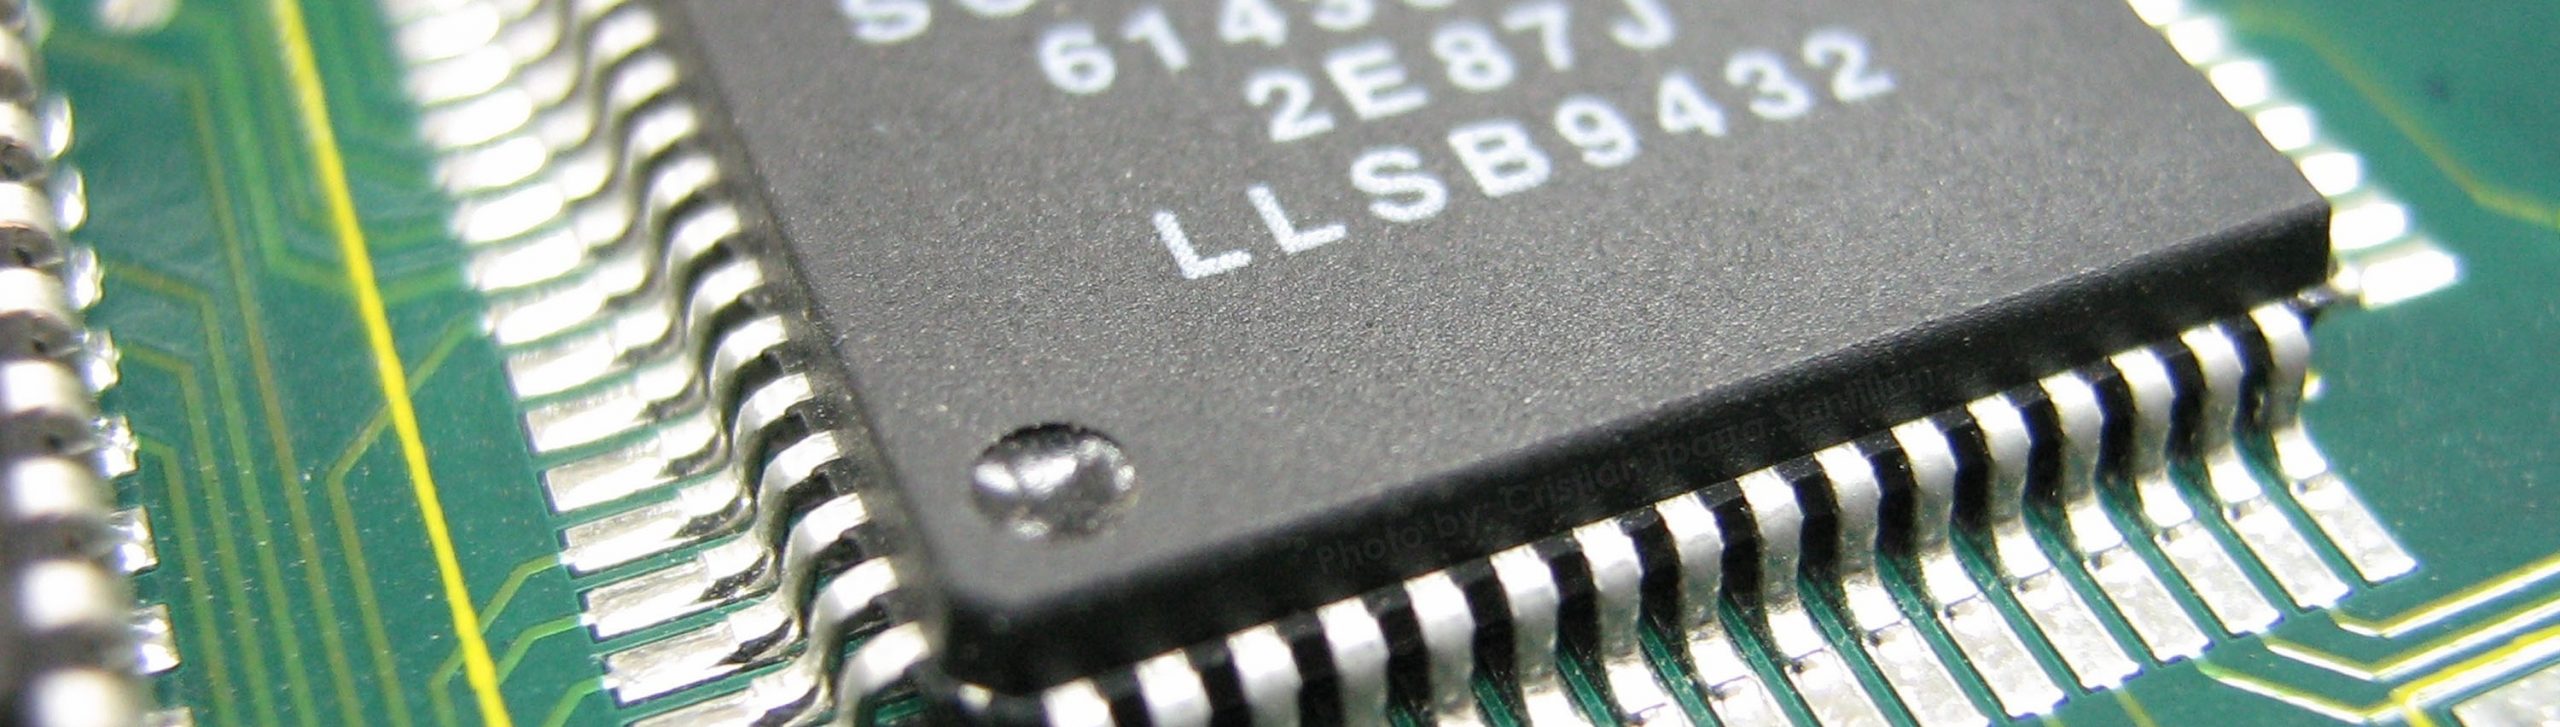 Close up of microchip